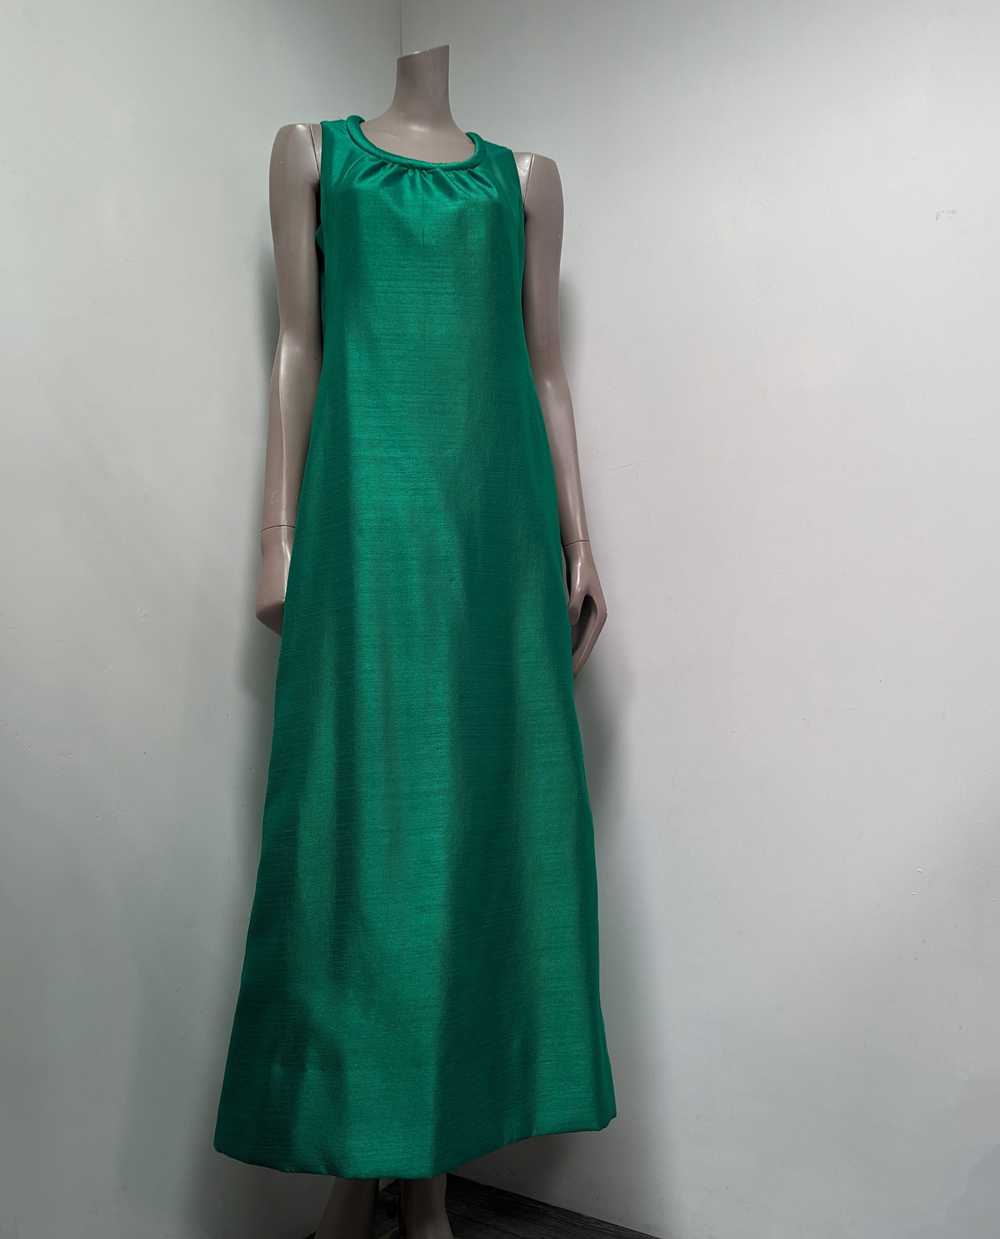 Incredible 1960s bright green evening maxi dress … - image 1